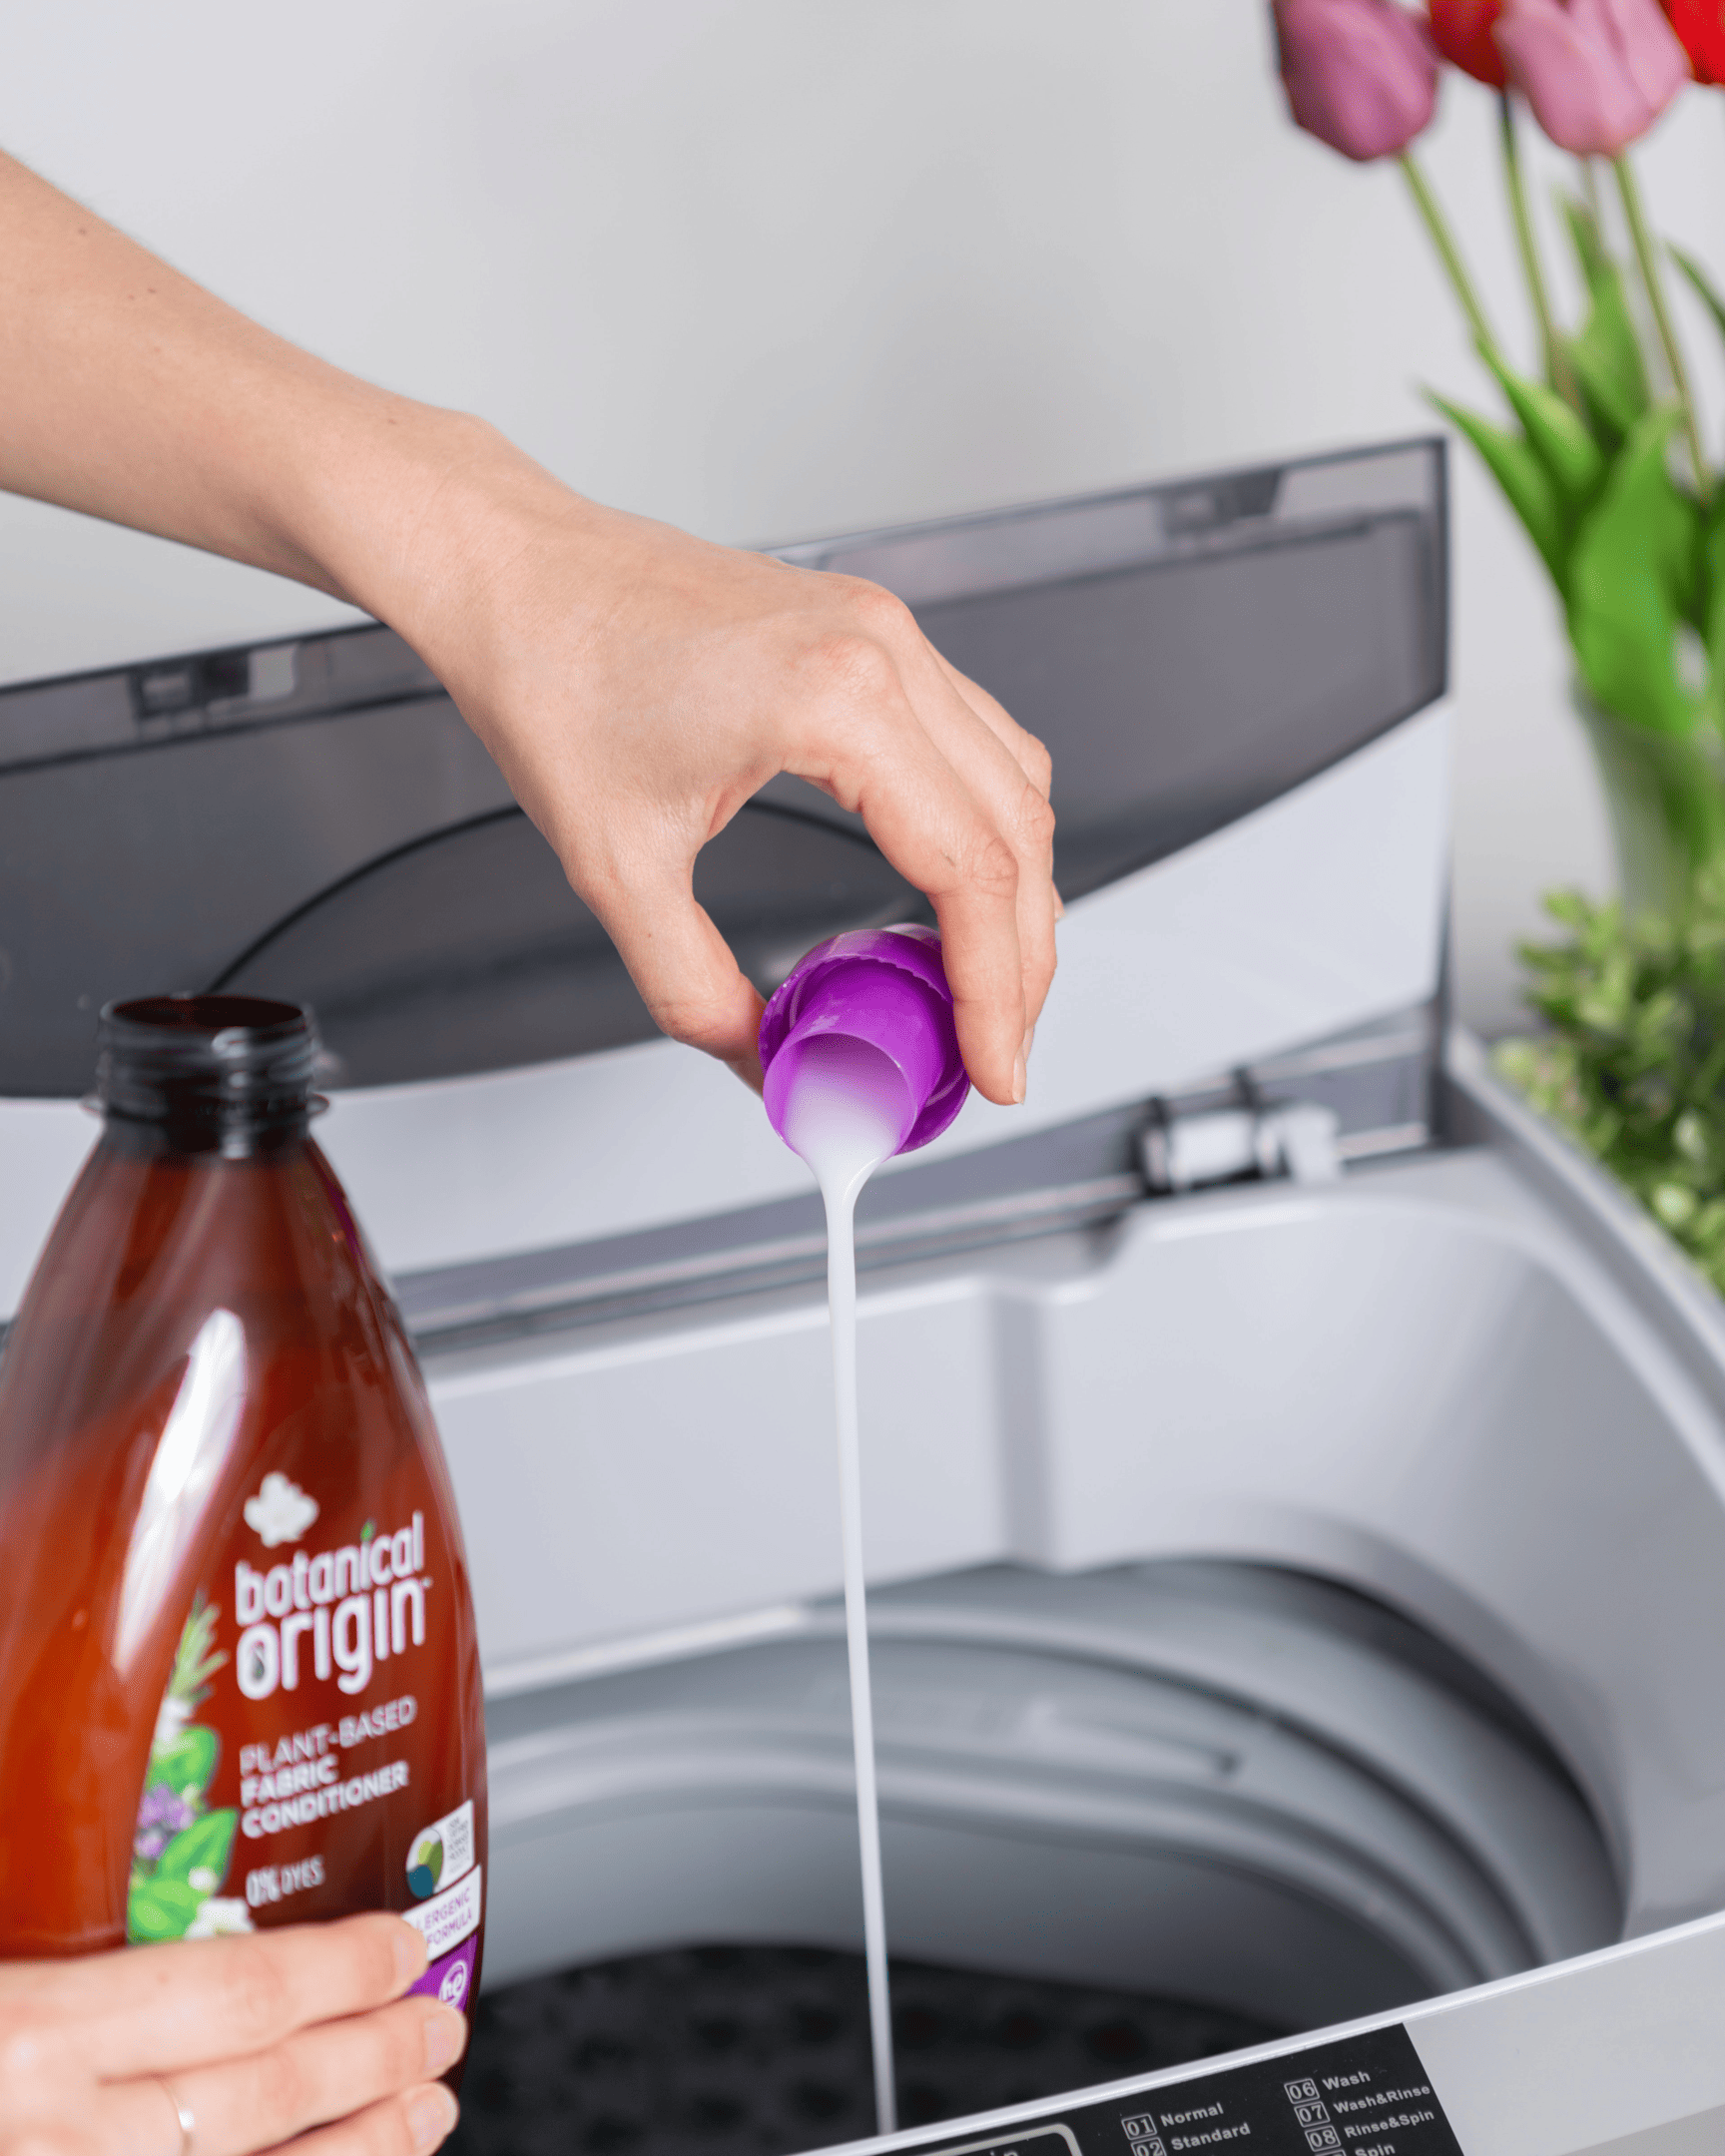 Perhaps the Safest laundry detergent being poured in washing machines, cleaning products, liquid detergent